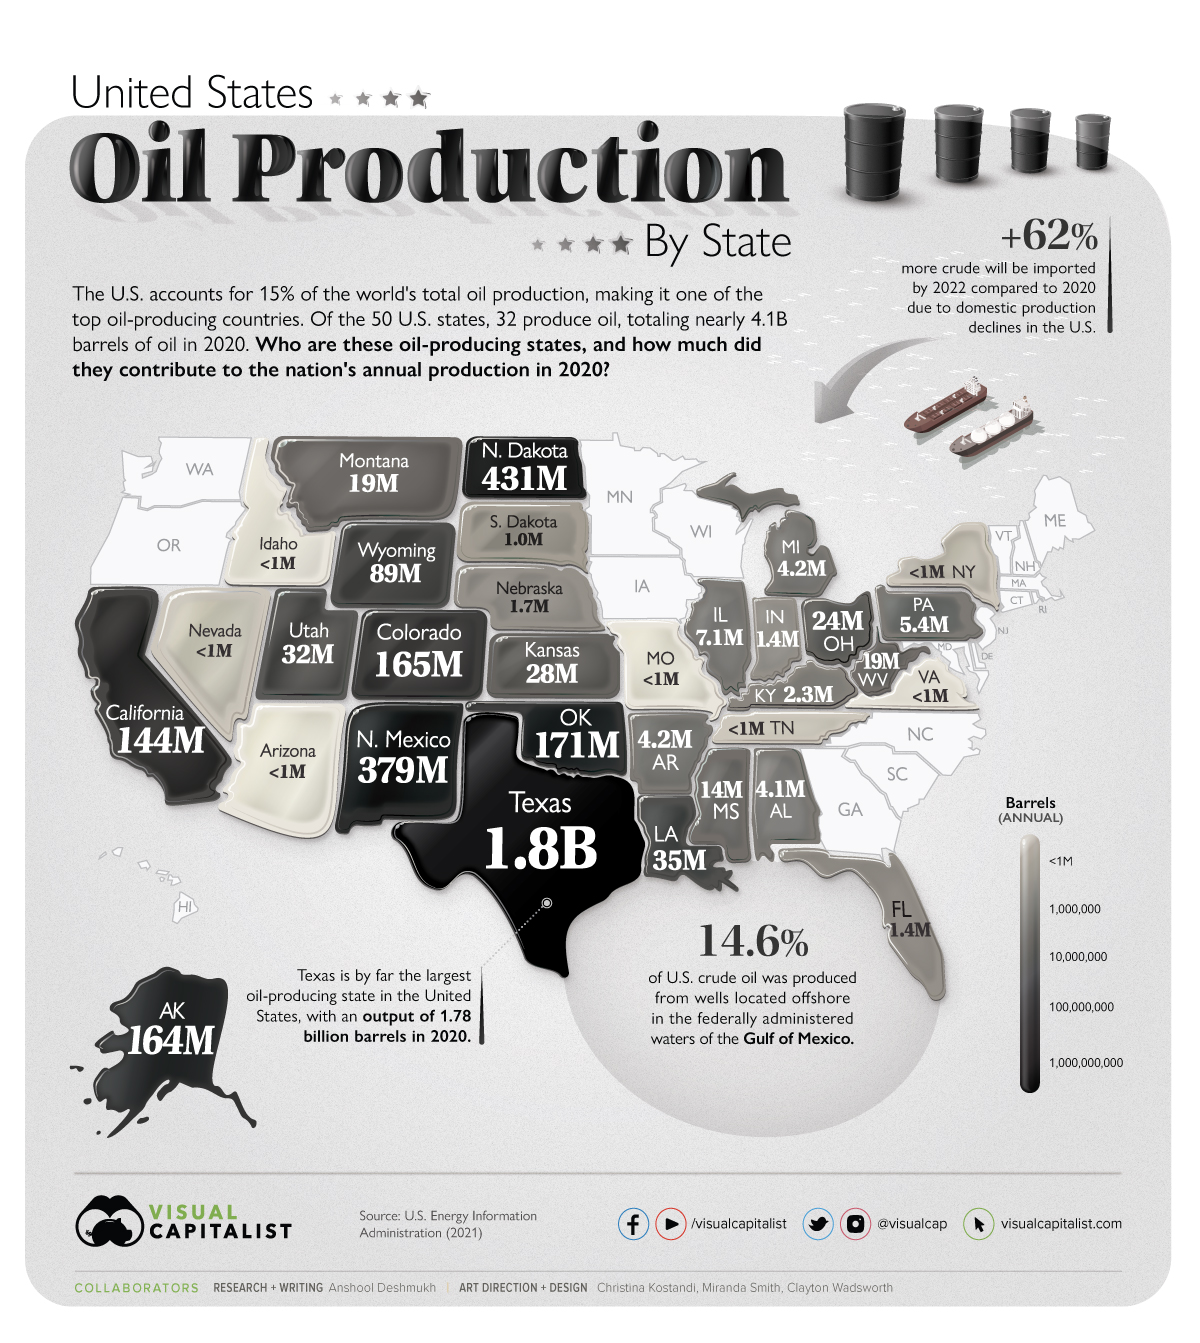 Map of U.S. Oil Production by State